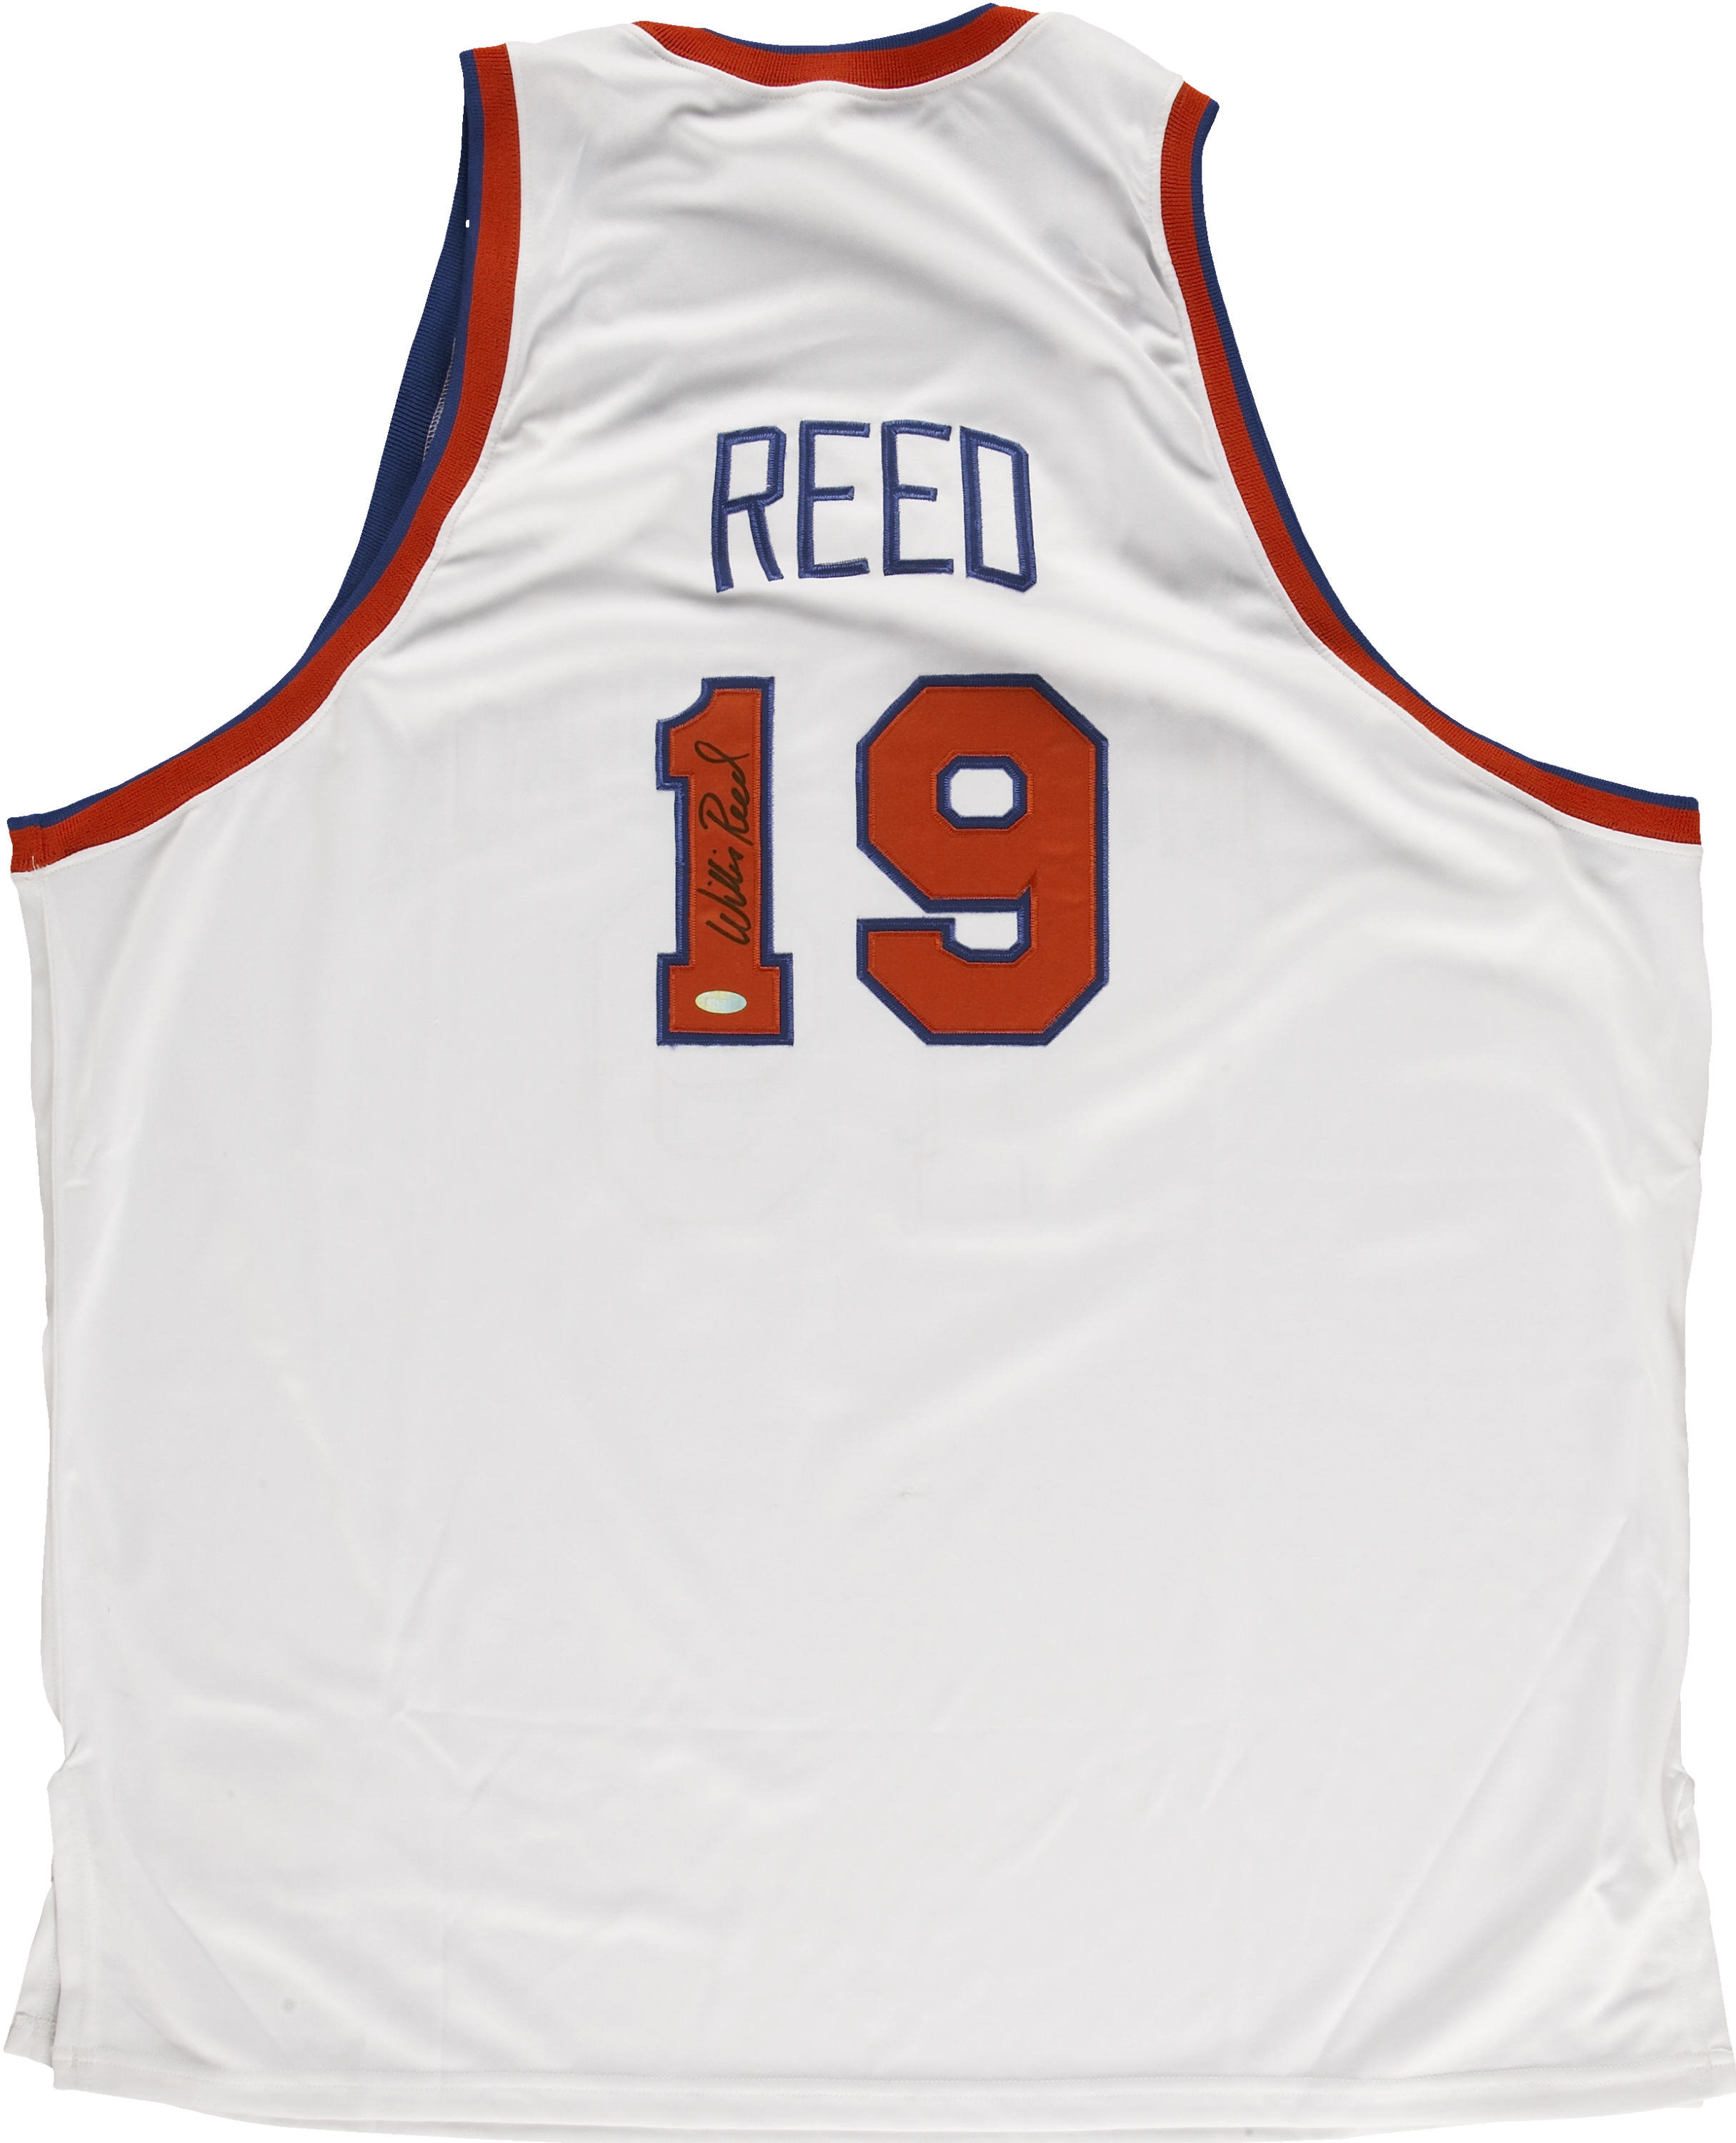 Willis Reed of the NY Knicks signed autographed basketball jersey